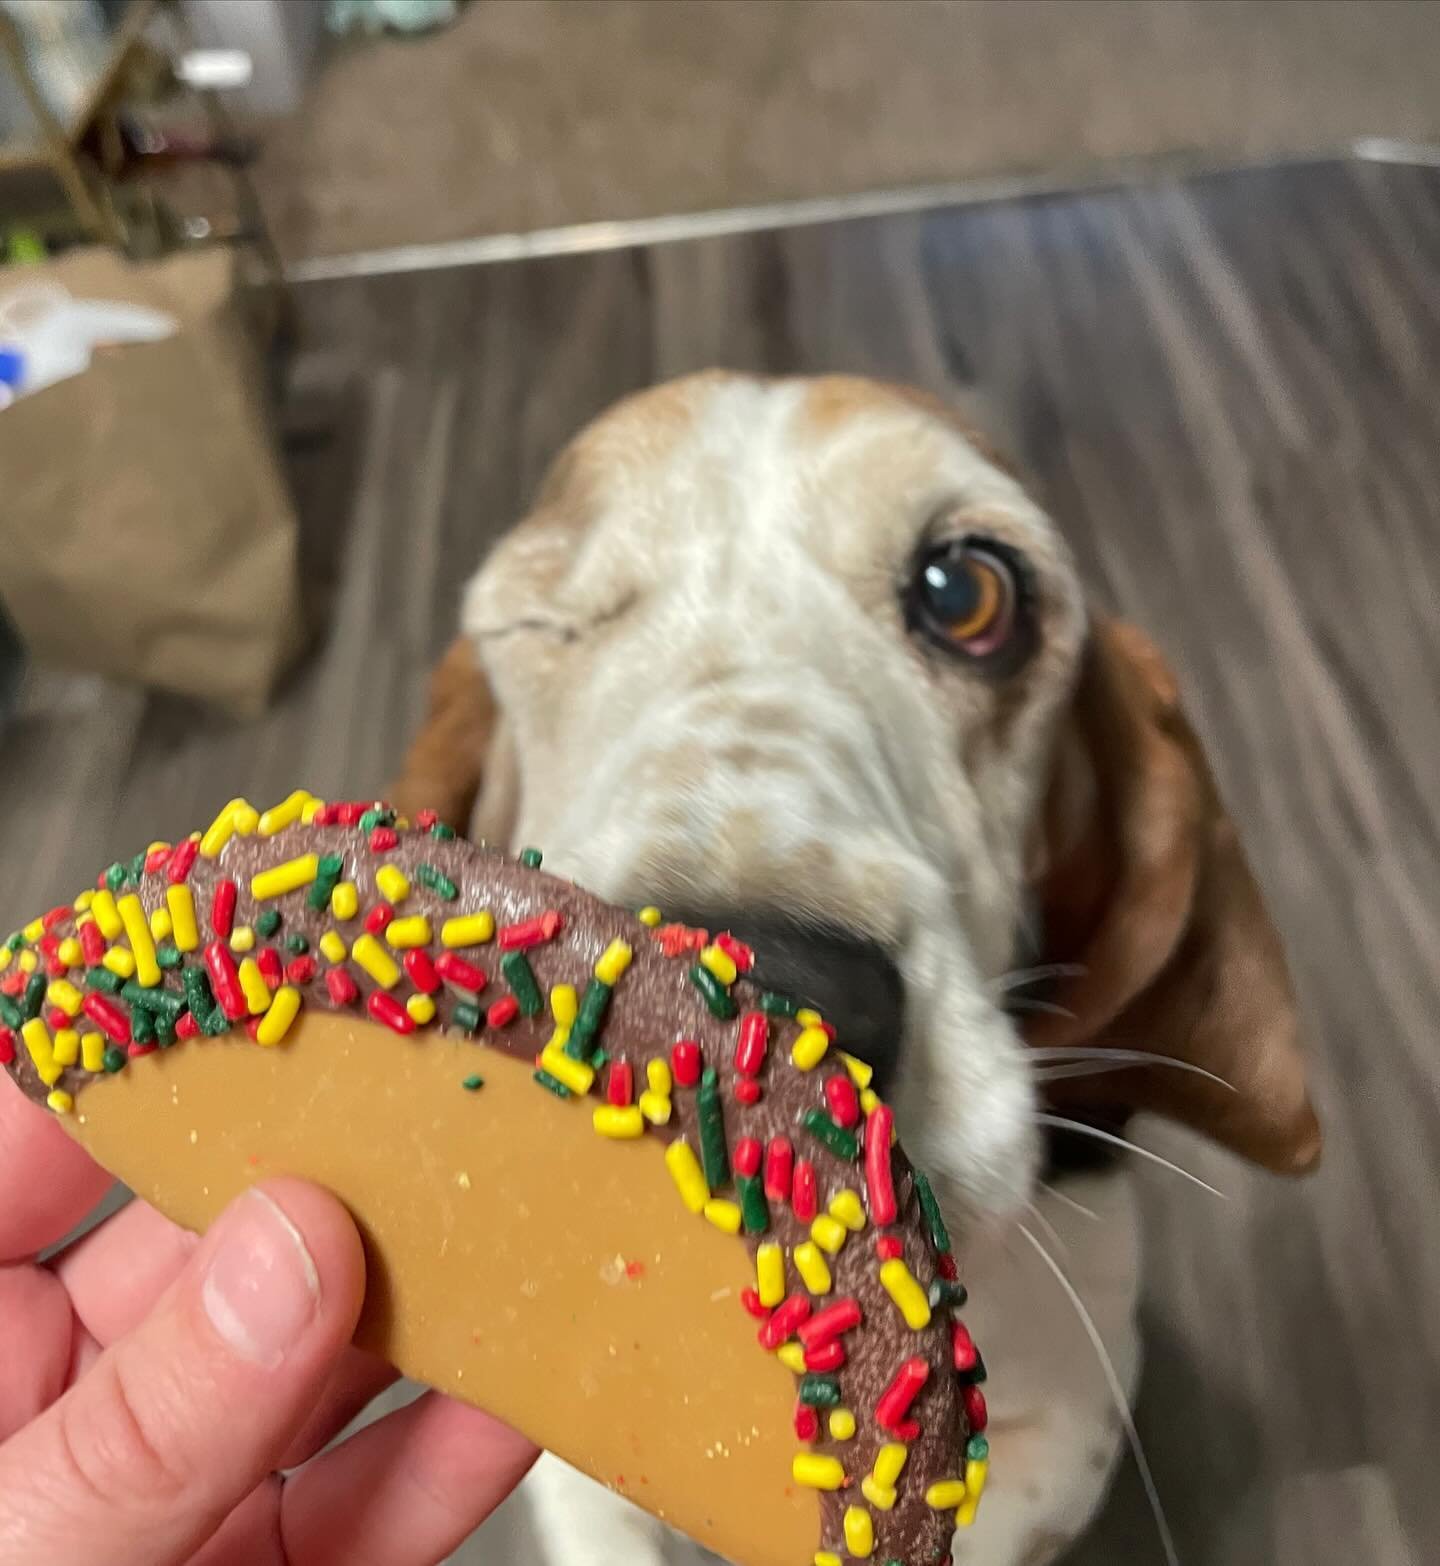 This is Rosie, she came in during her walk and wanted to share how much she enjoyed her taco cookie. 
🌮 😋 🌮 
Happy Cinco De Mayo! 
#cincodemayo #taco #naturalpet